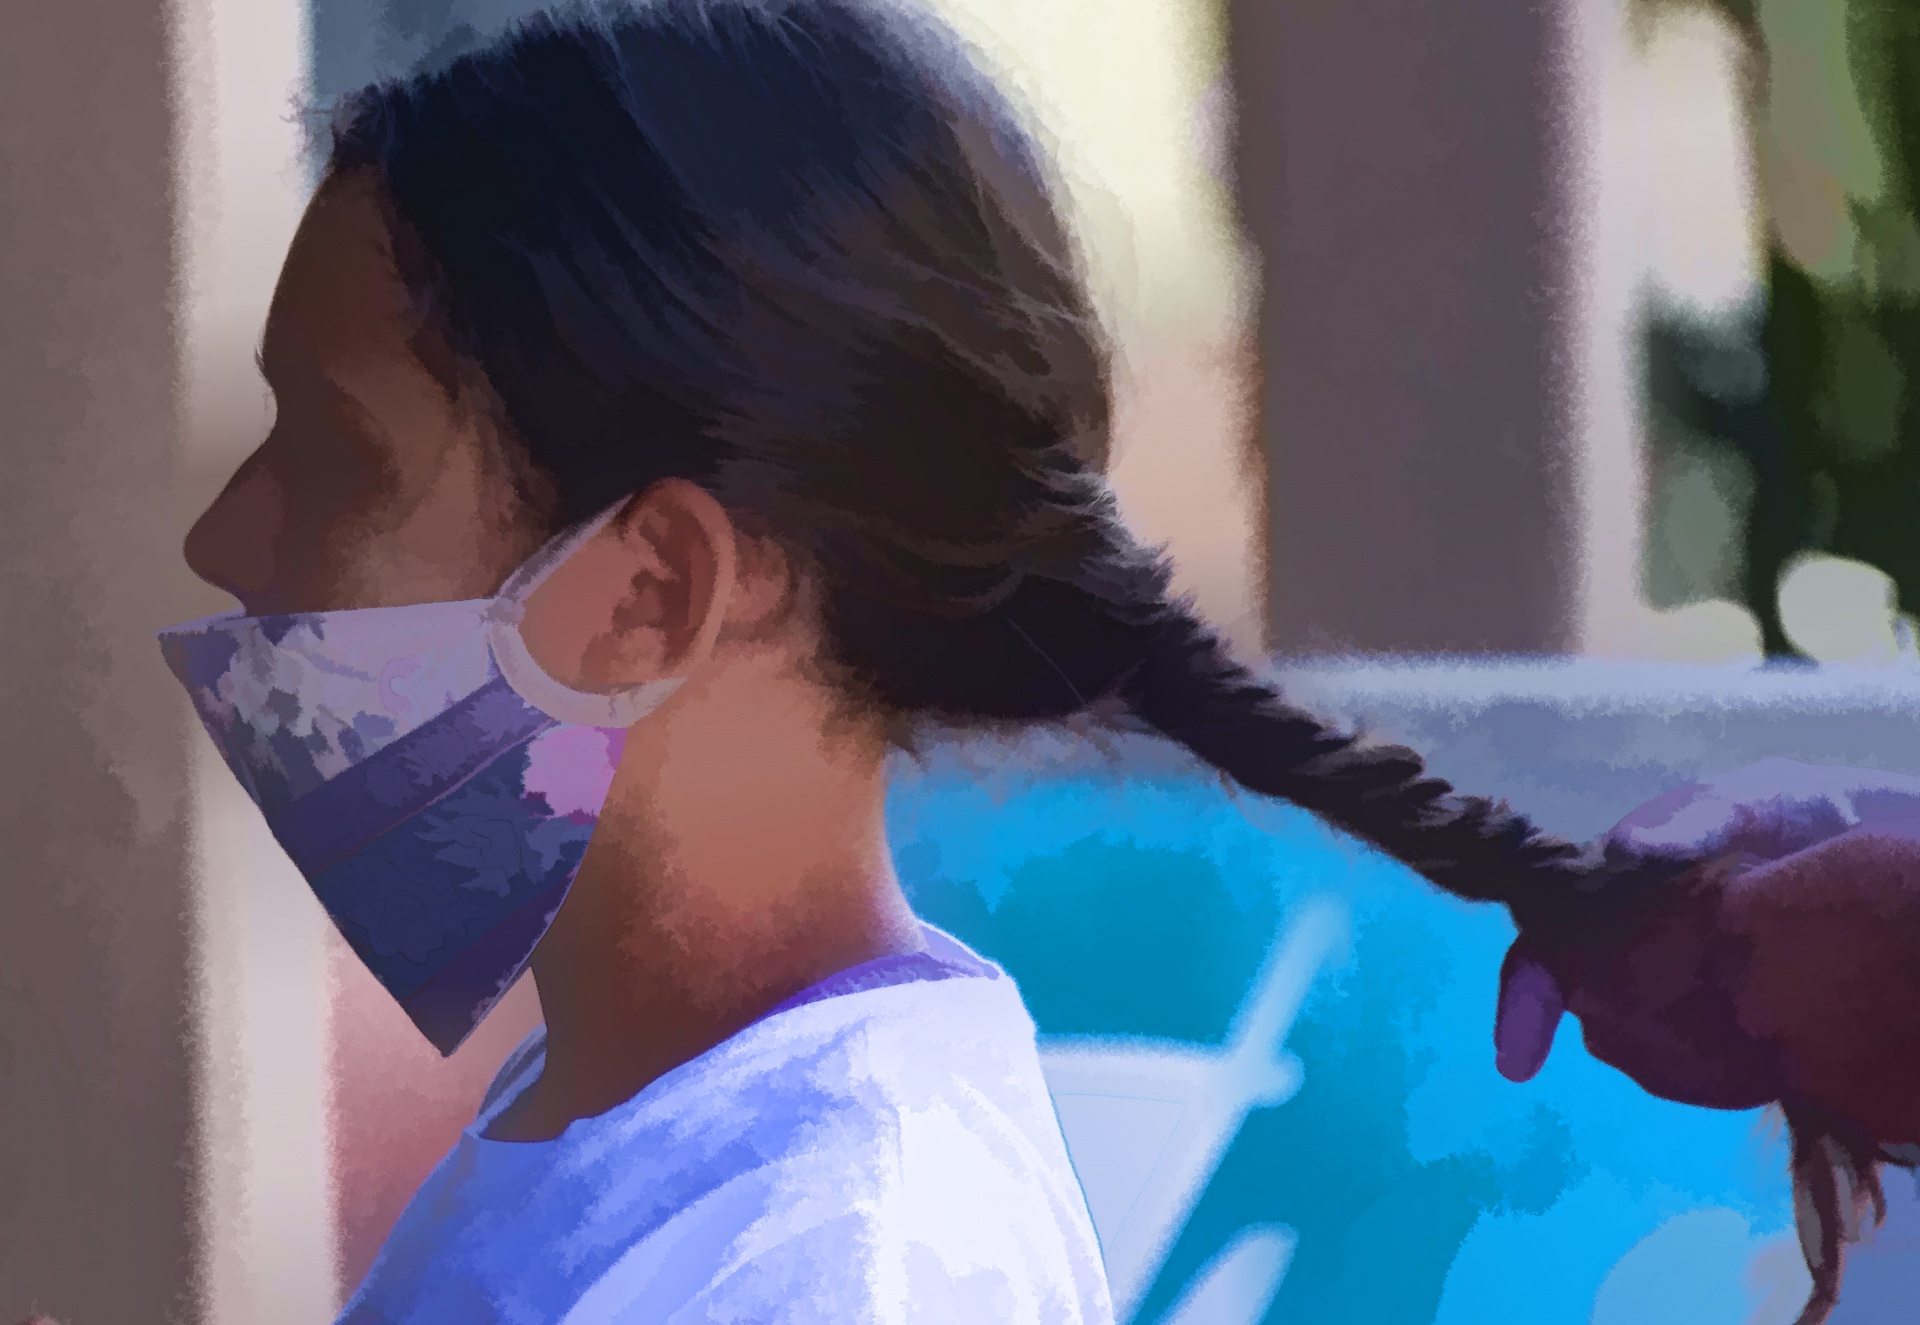 artistic illustration of a profile of a tween wearing a mask and getting her hair braided